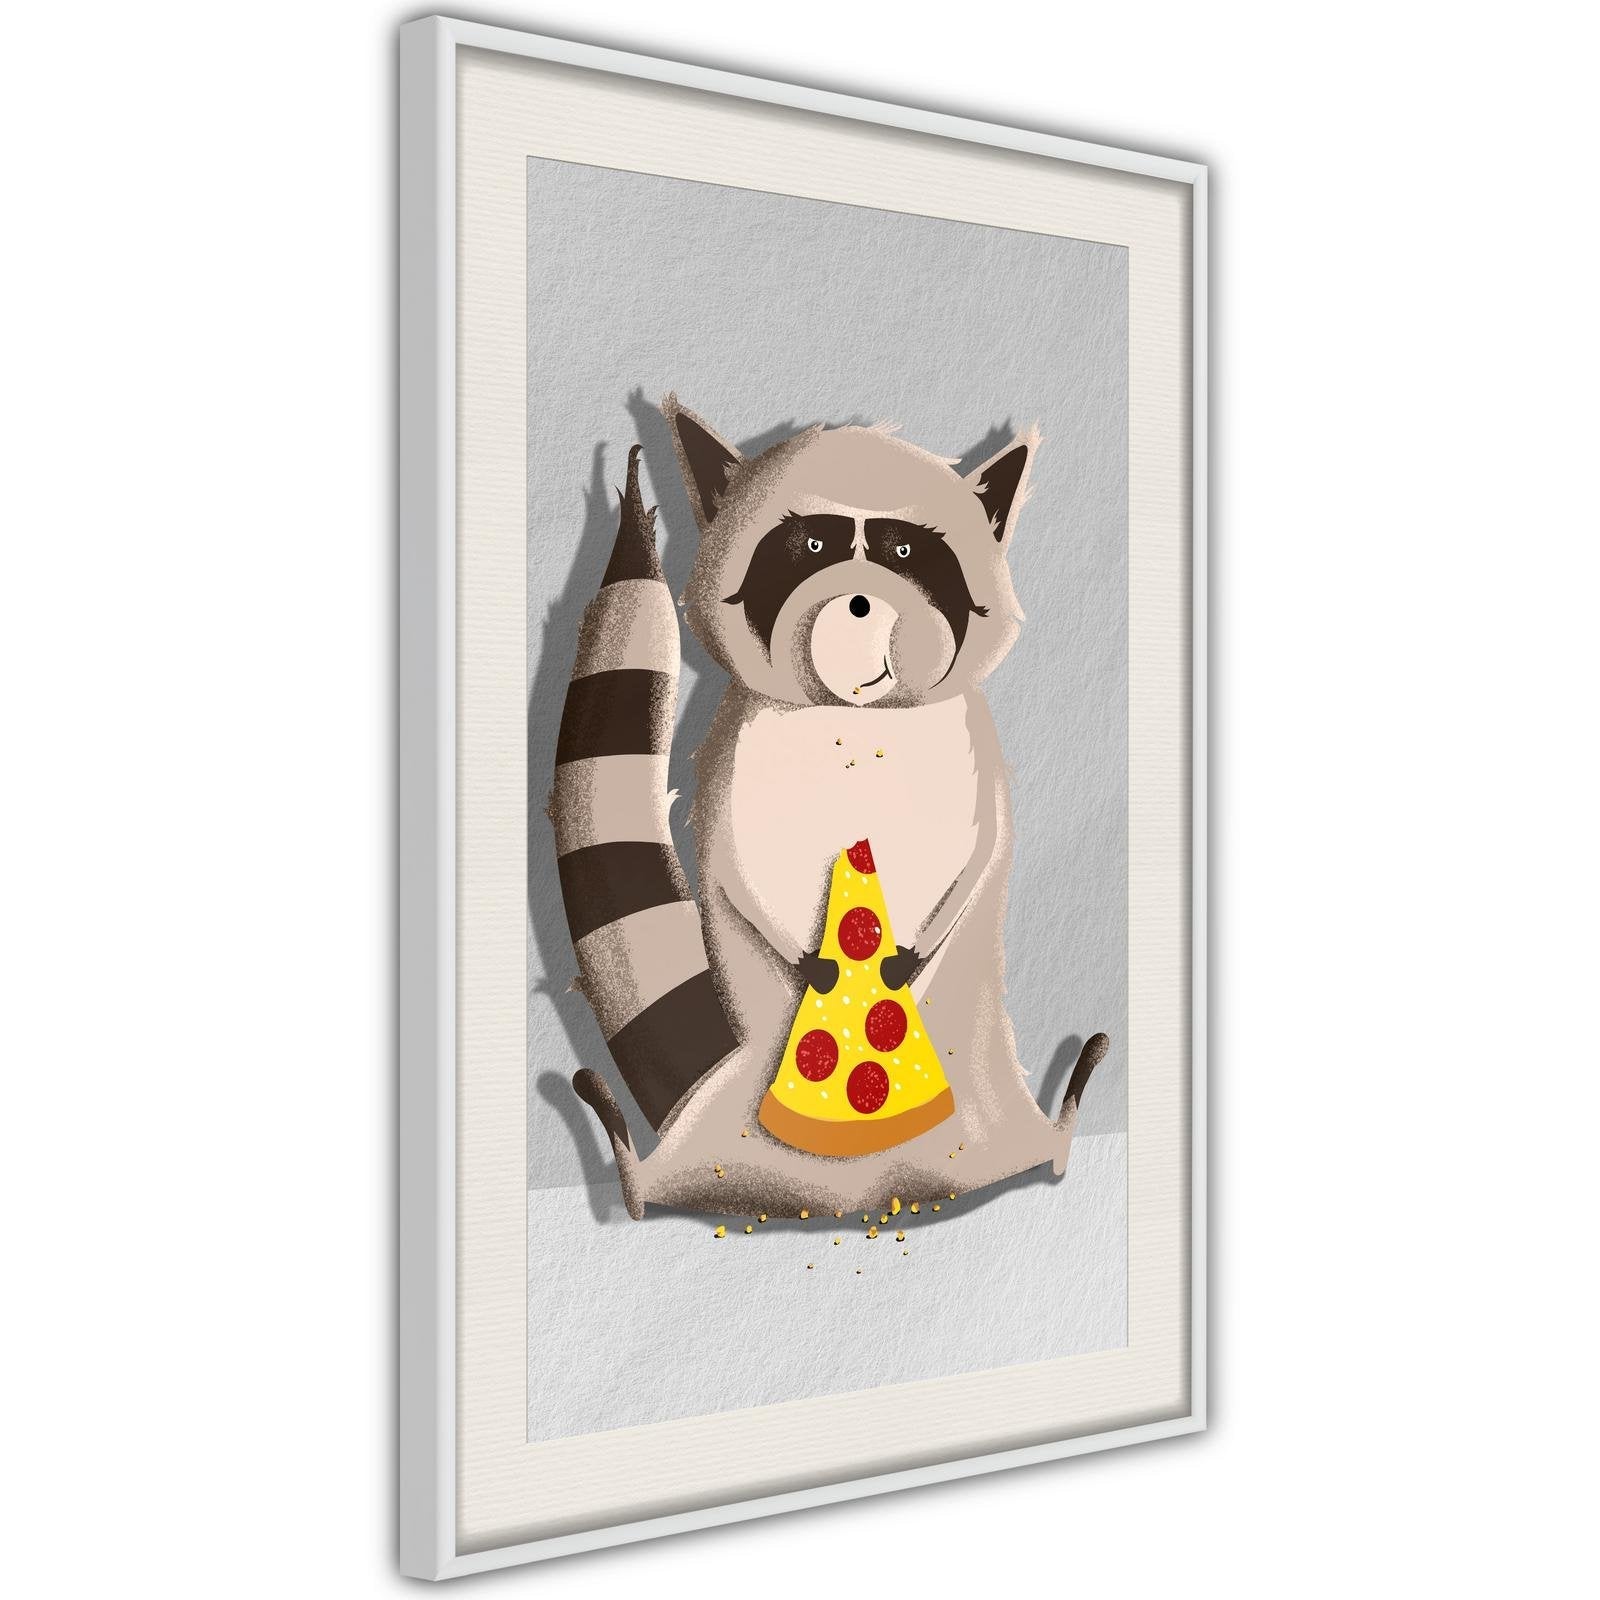 Inramad Poster / Tavla - Racoon Eating Pizza-Poster Inramad-Artgeist-peaceofhome.se